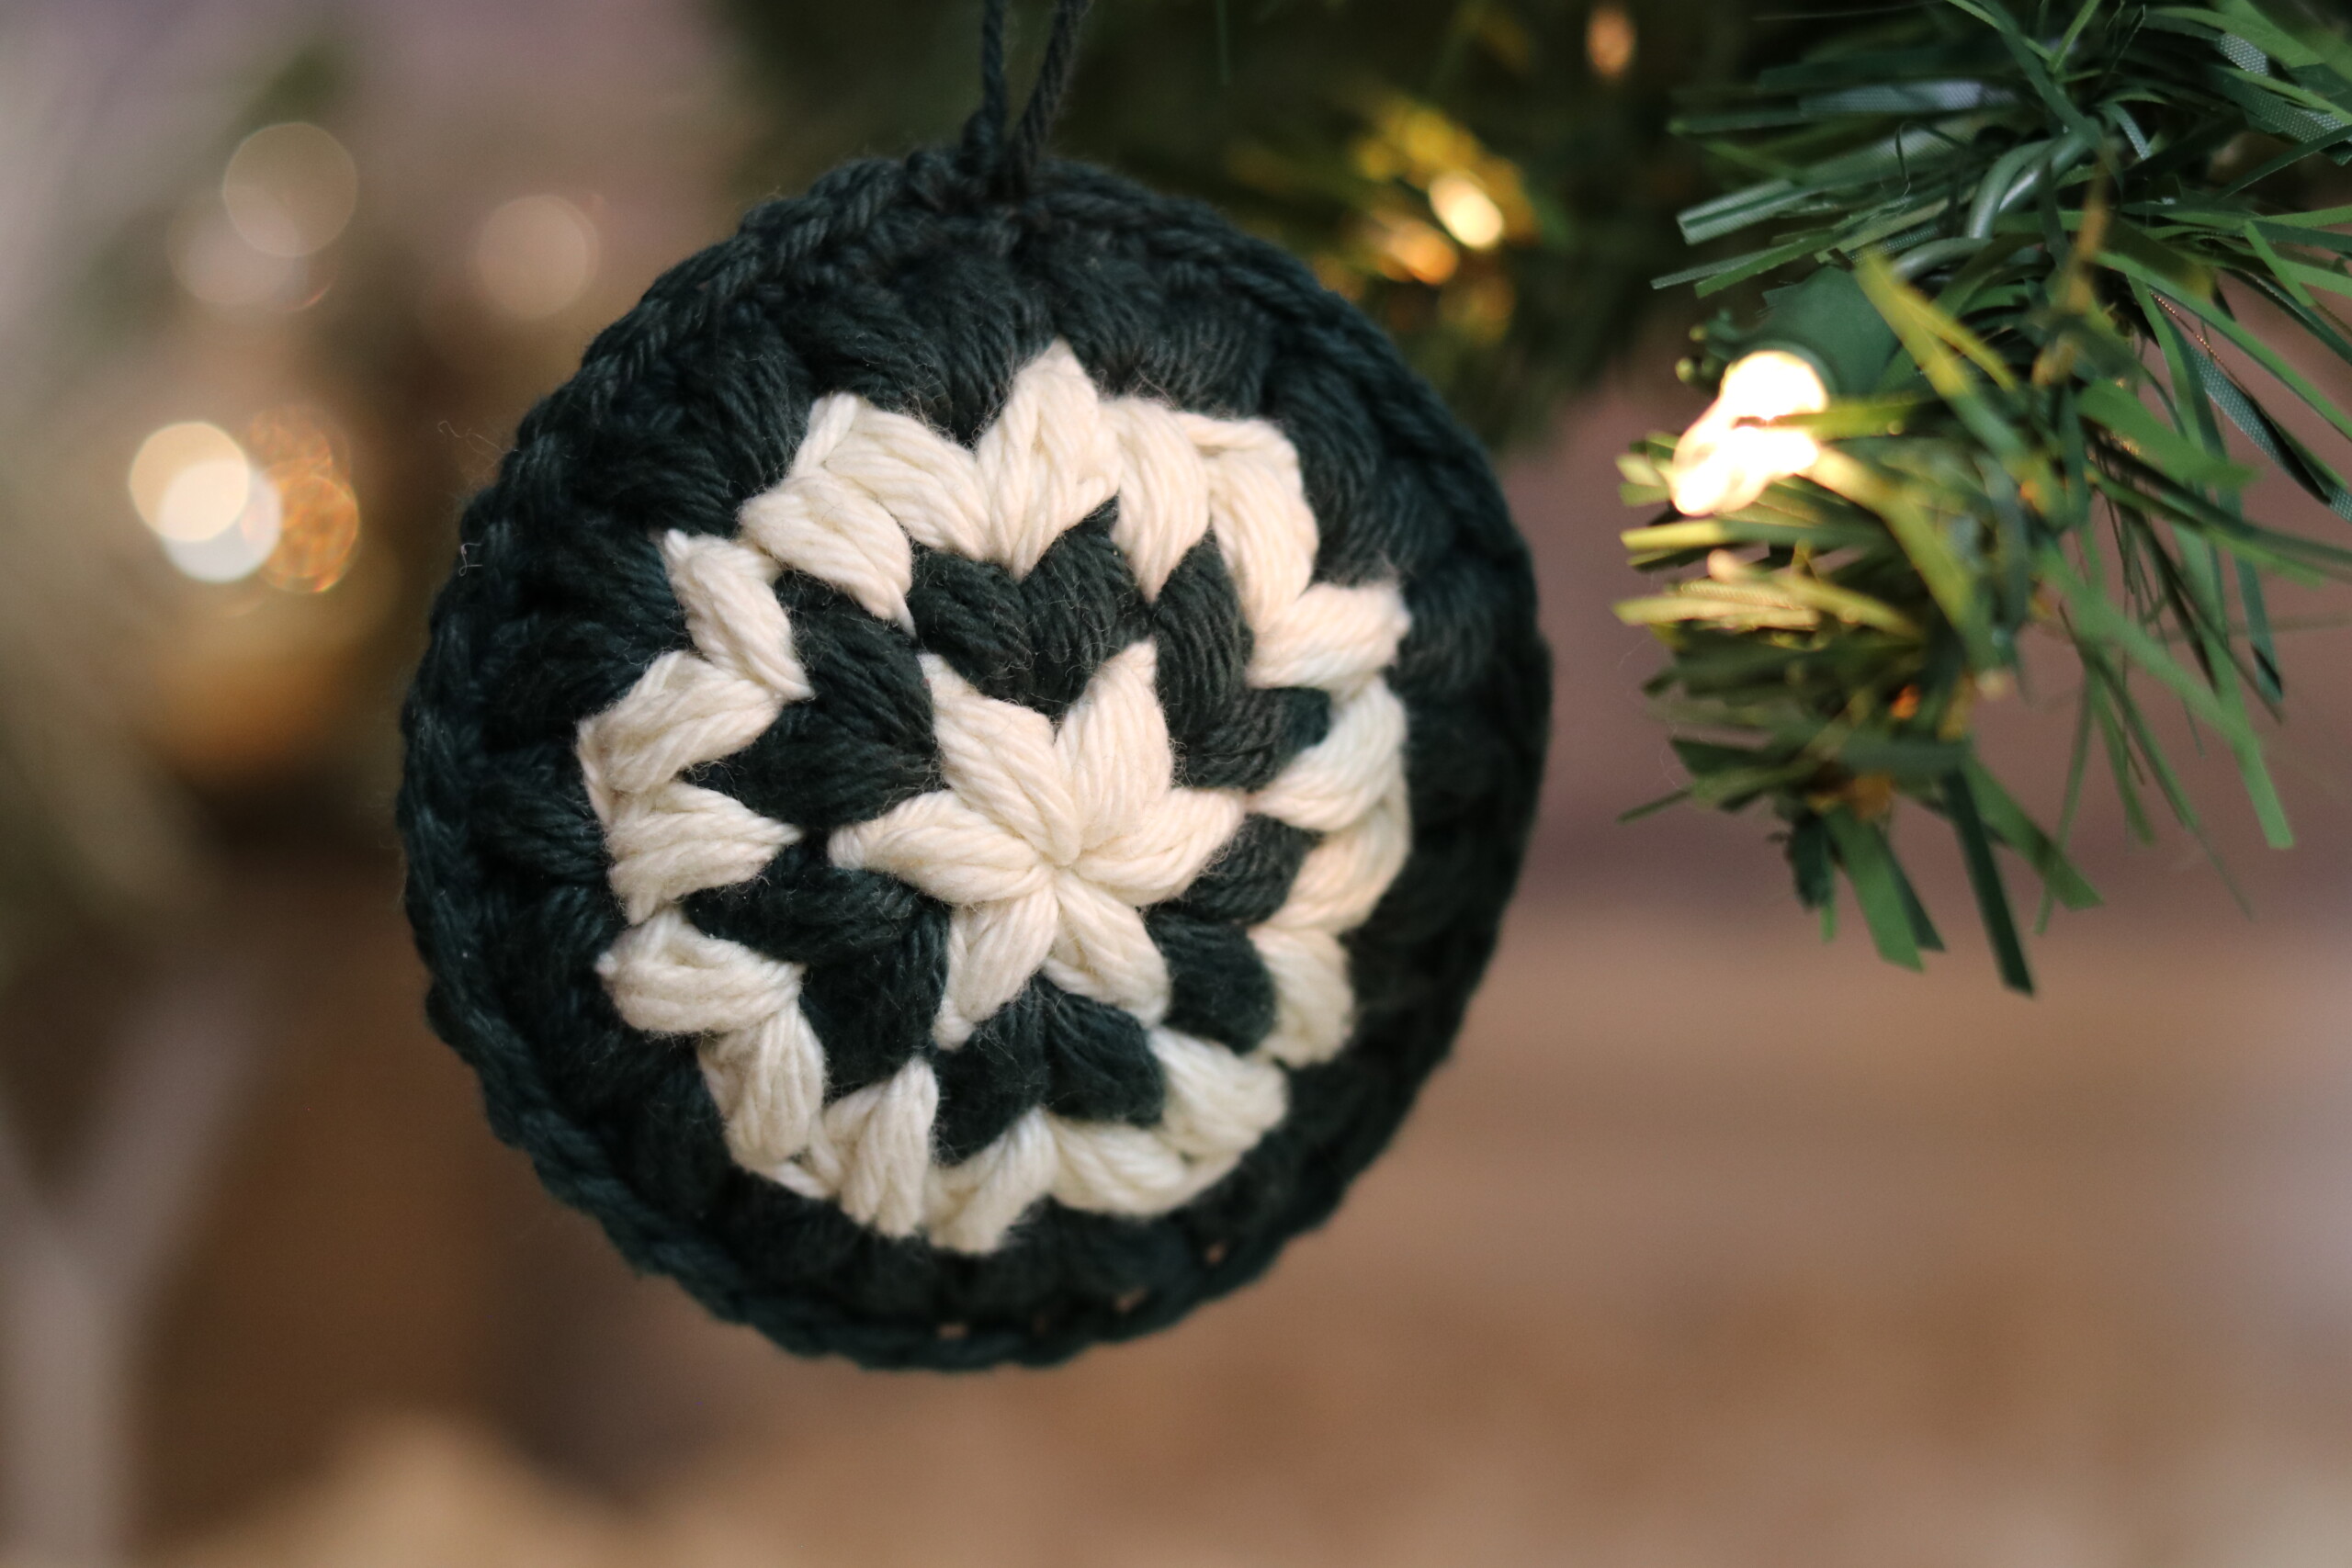 A green and which textured crochet ornament featuring crochet puff stitches